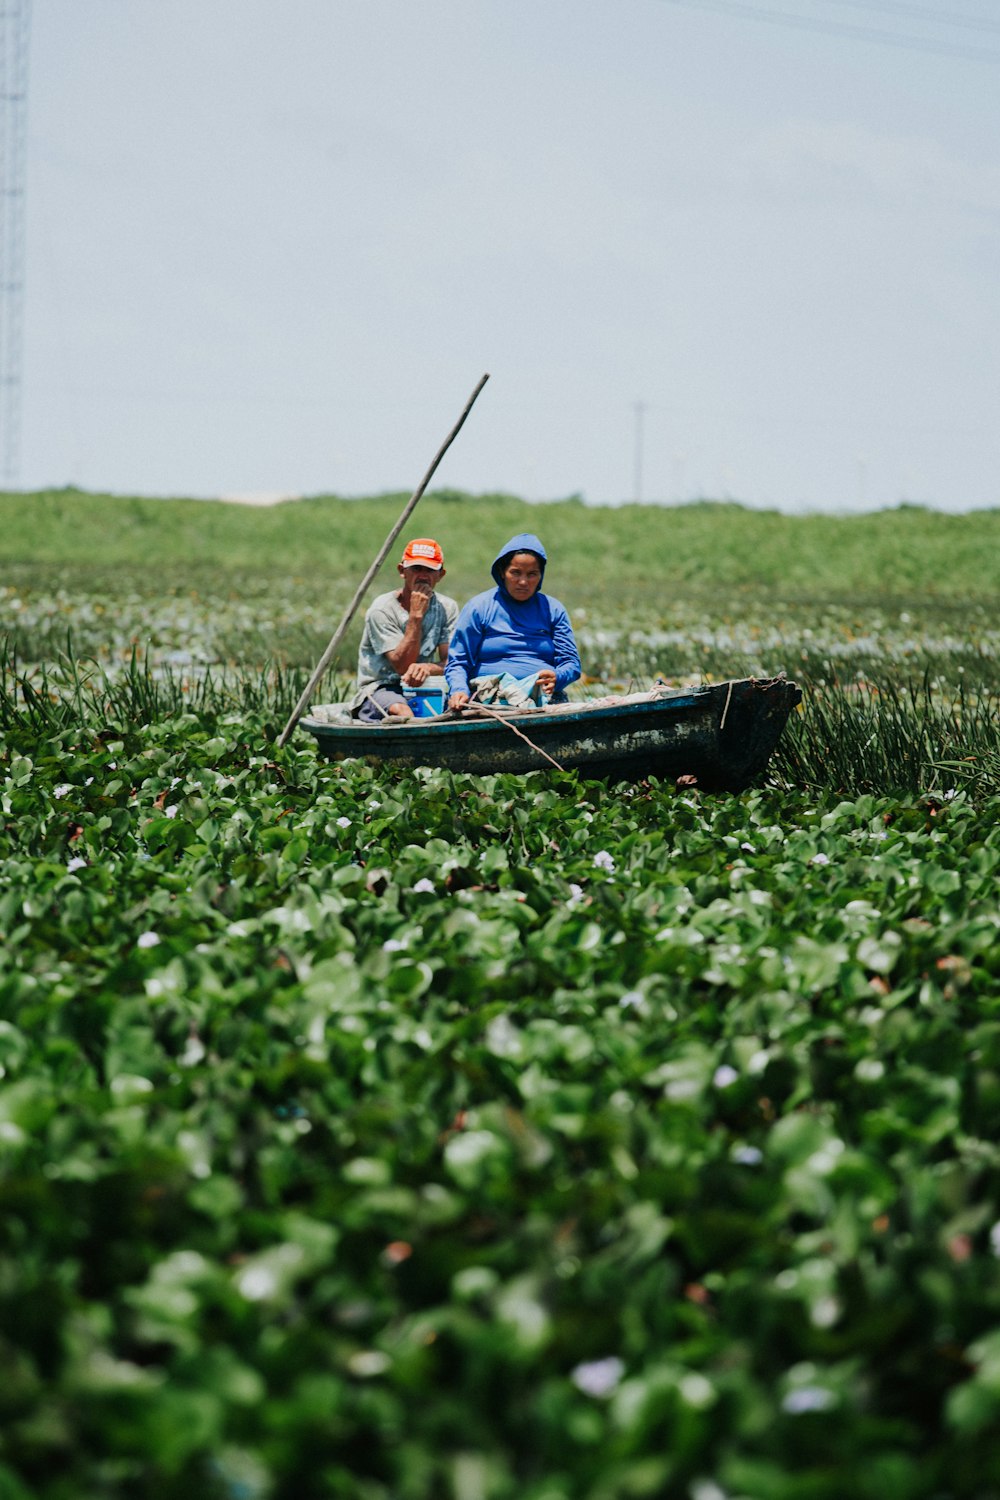 two people in a small boat in a field